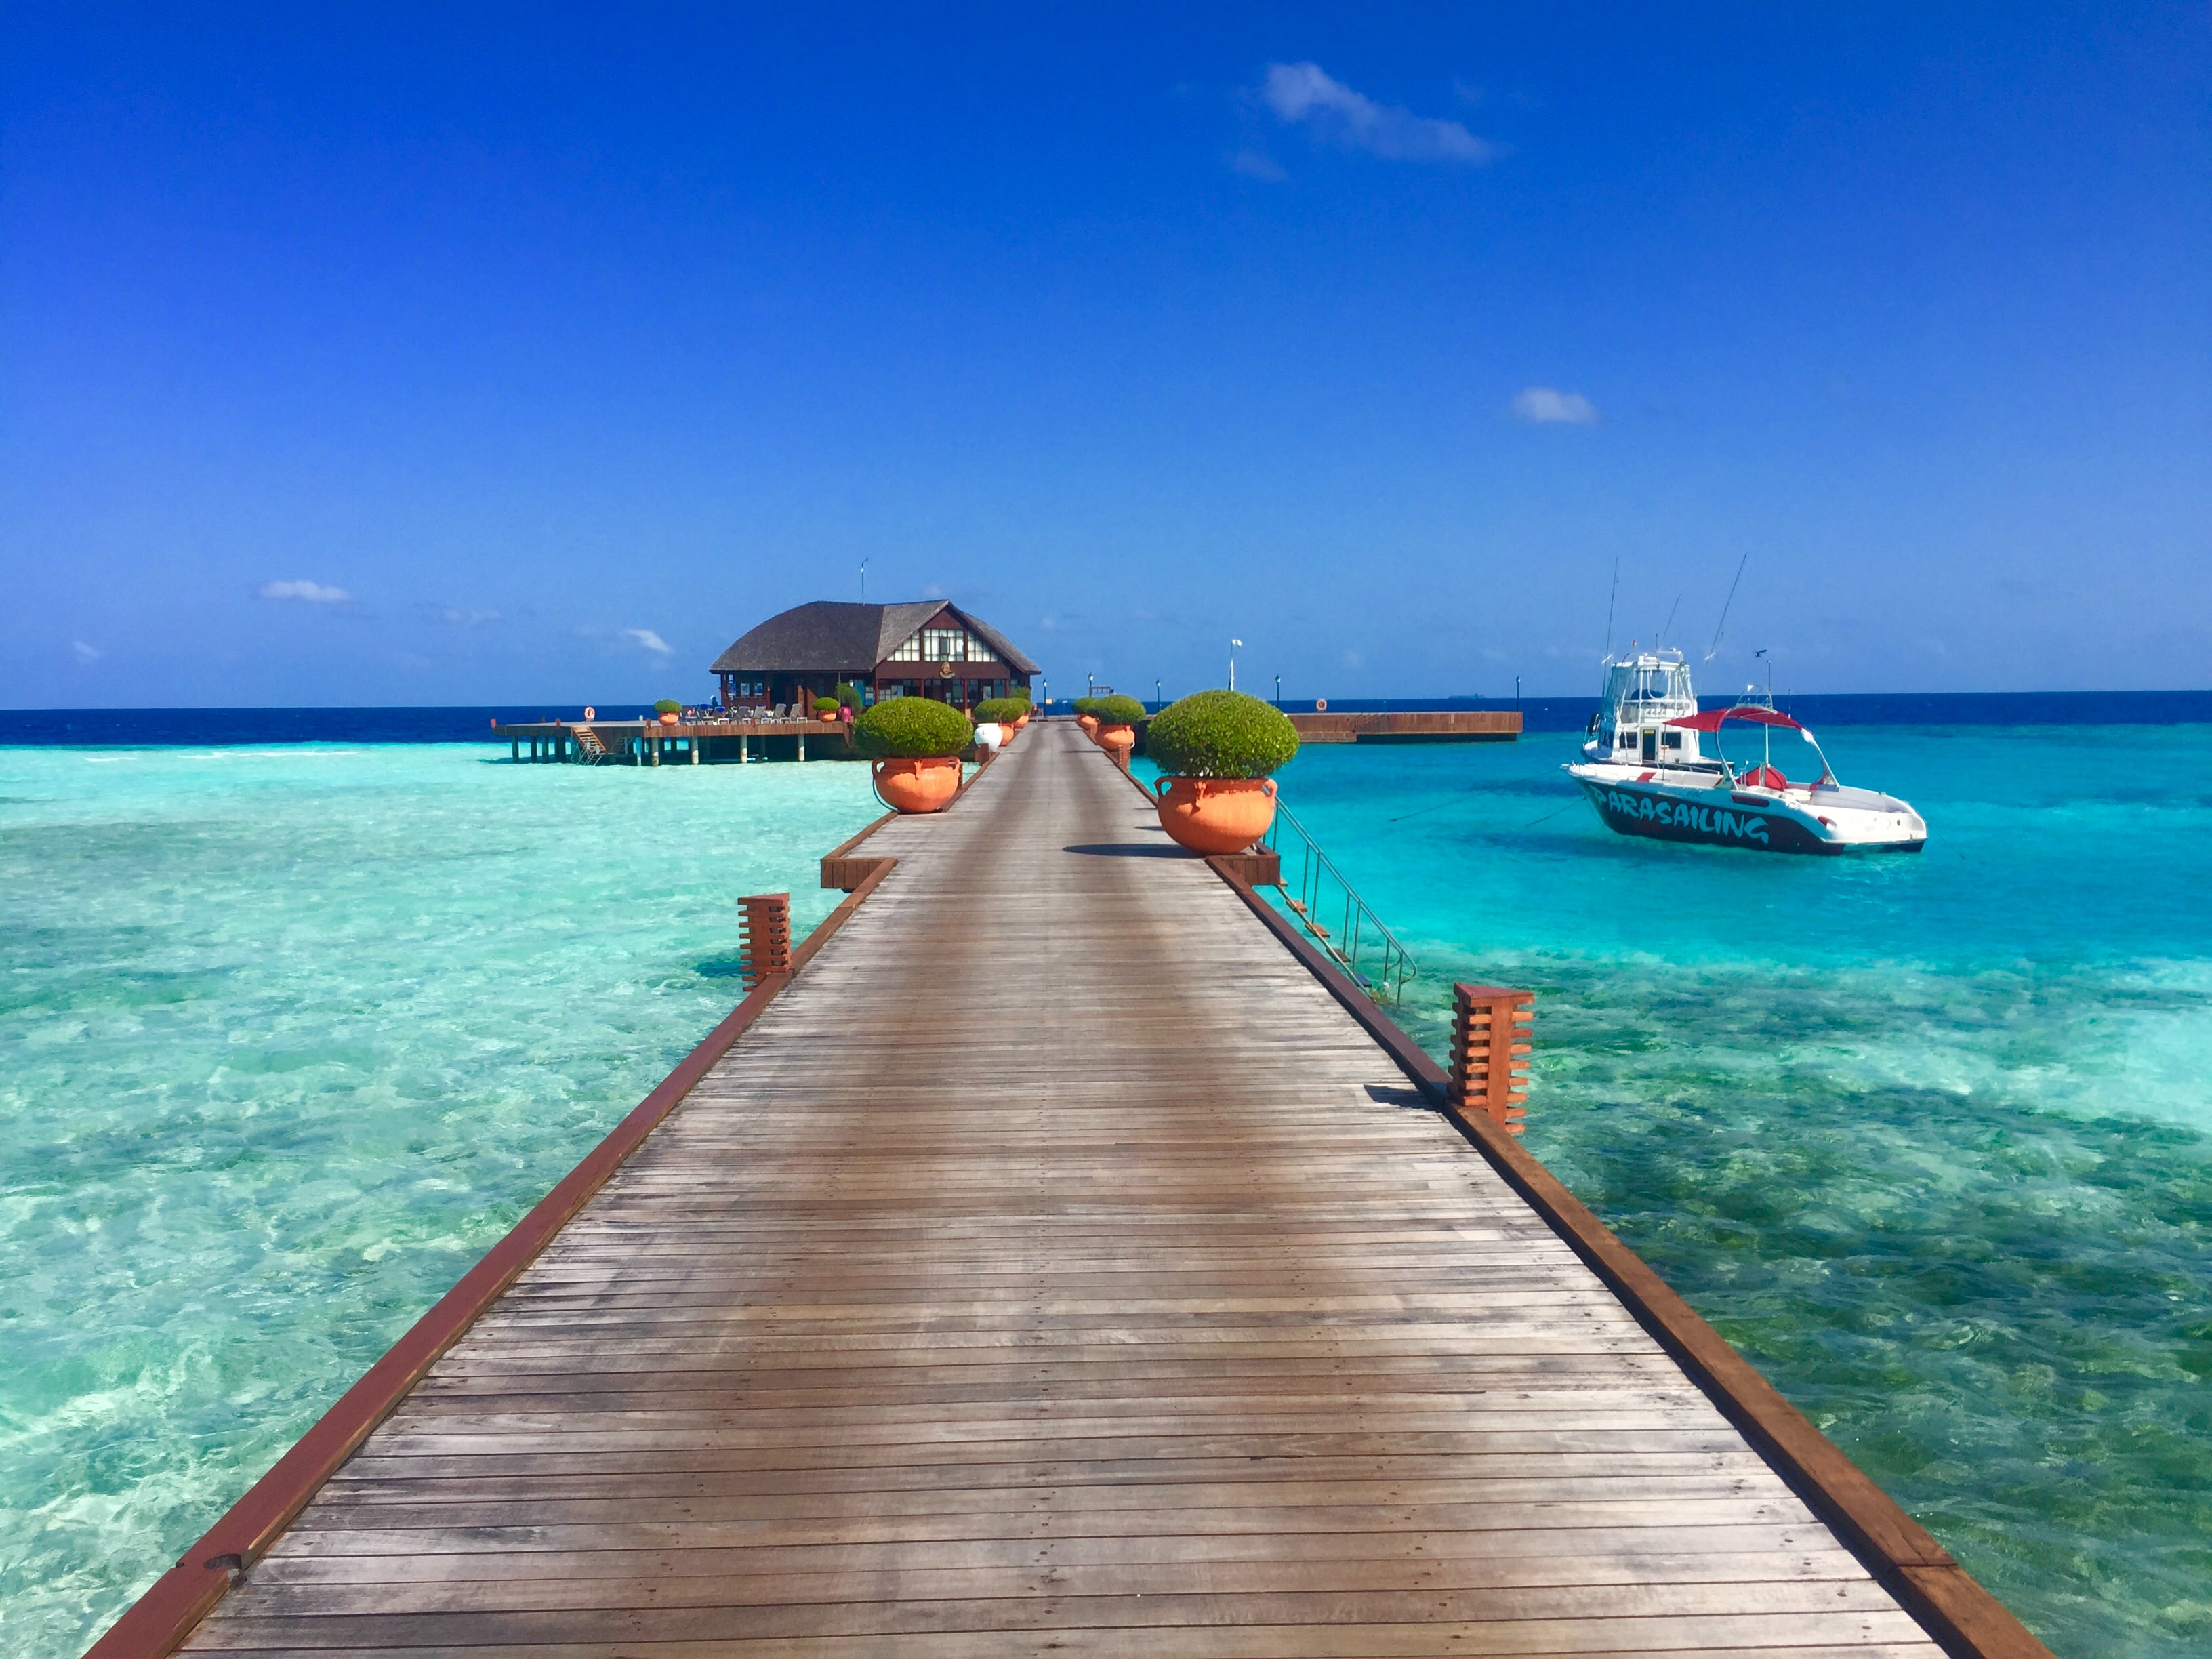 Top 5 Luxurious Hotels in the Maldives